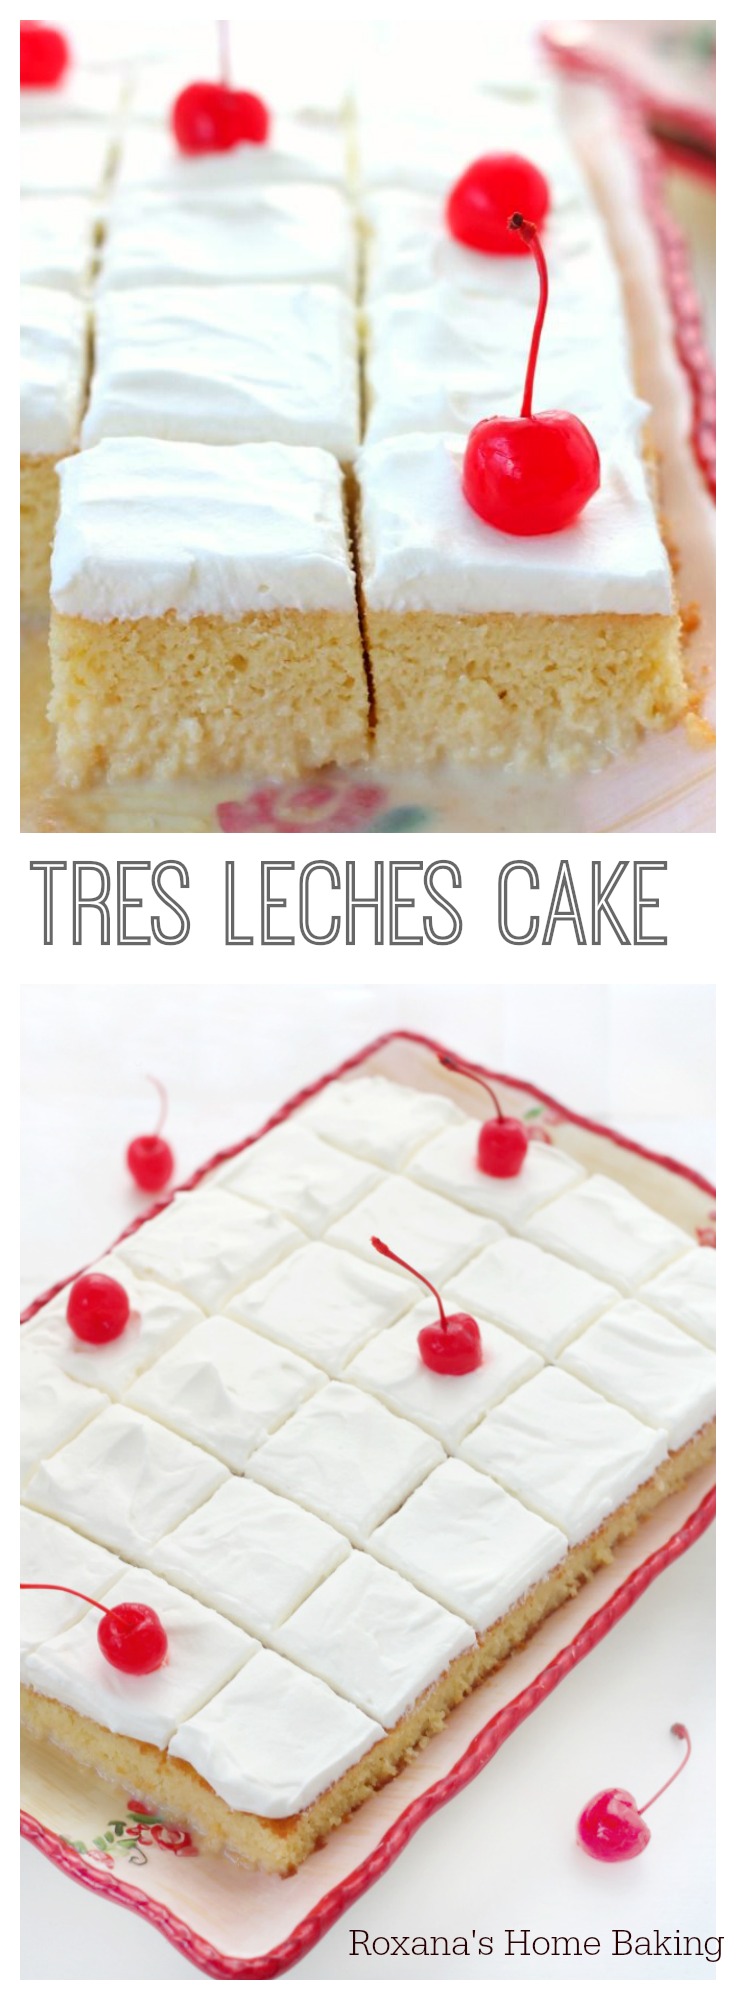 Tres leches cake is a sponge cake soaked in three types of milk and topped with whipped cream, this simple, easy and perhaps the moistest cake you’ll ever have had, has a unique flavor you cannot find in any other cakes.